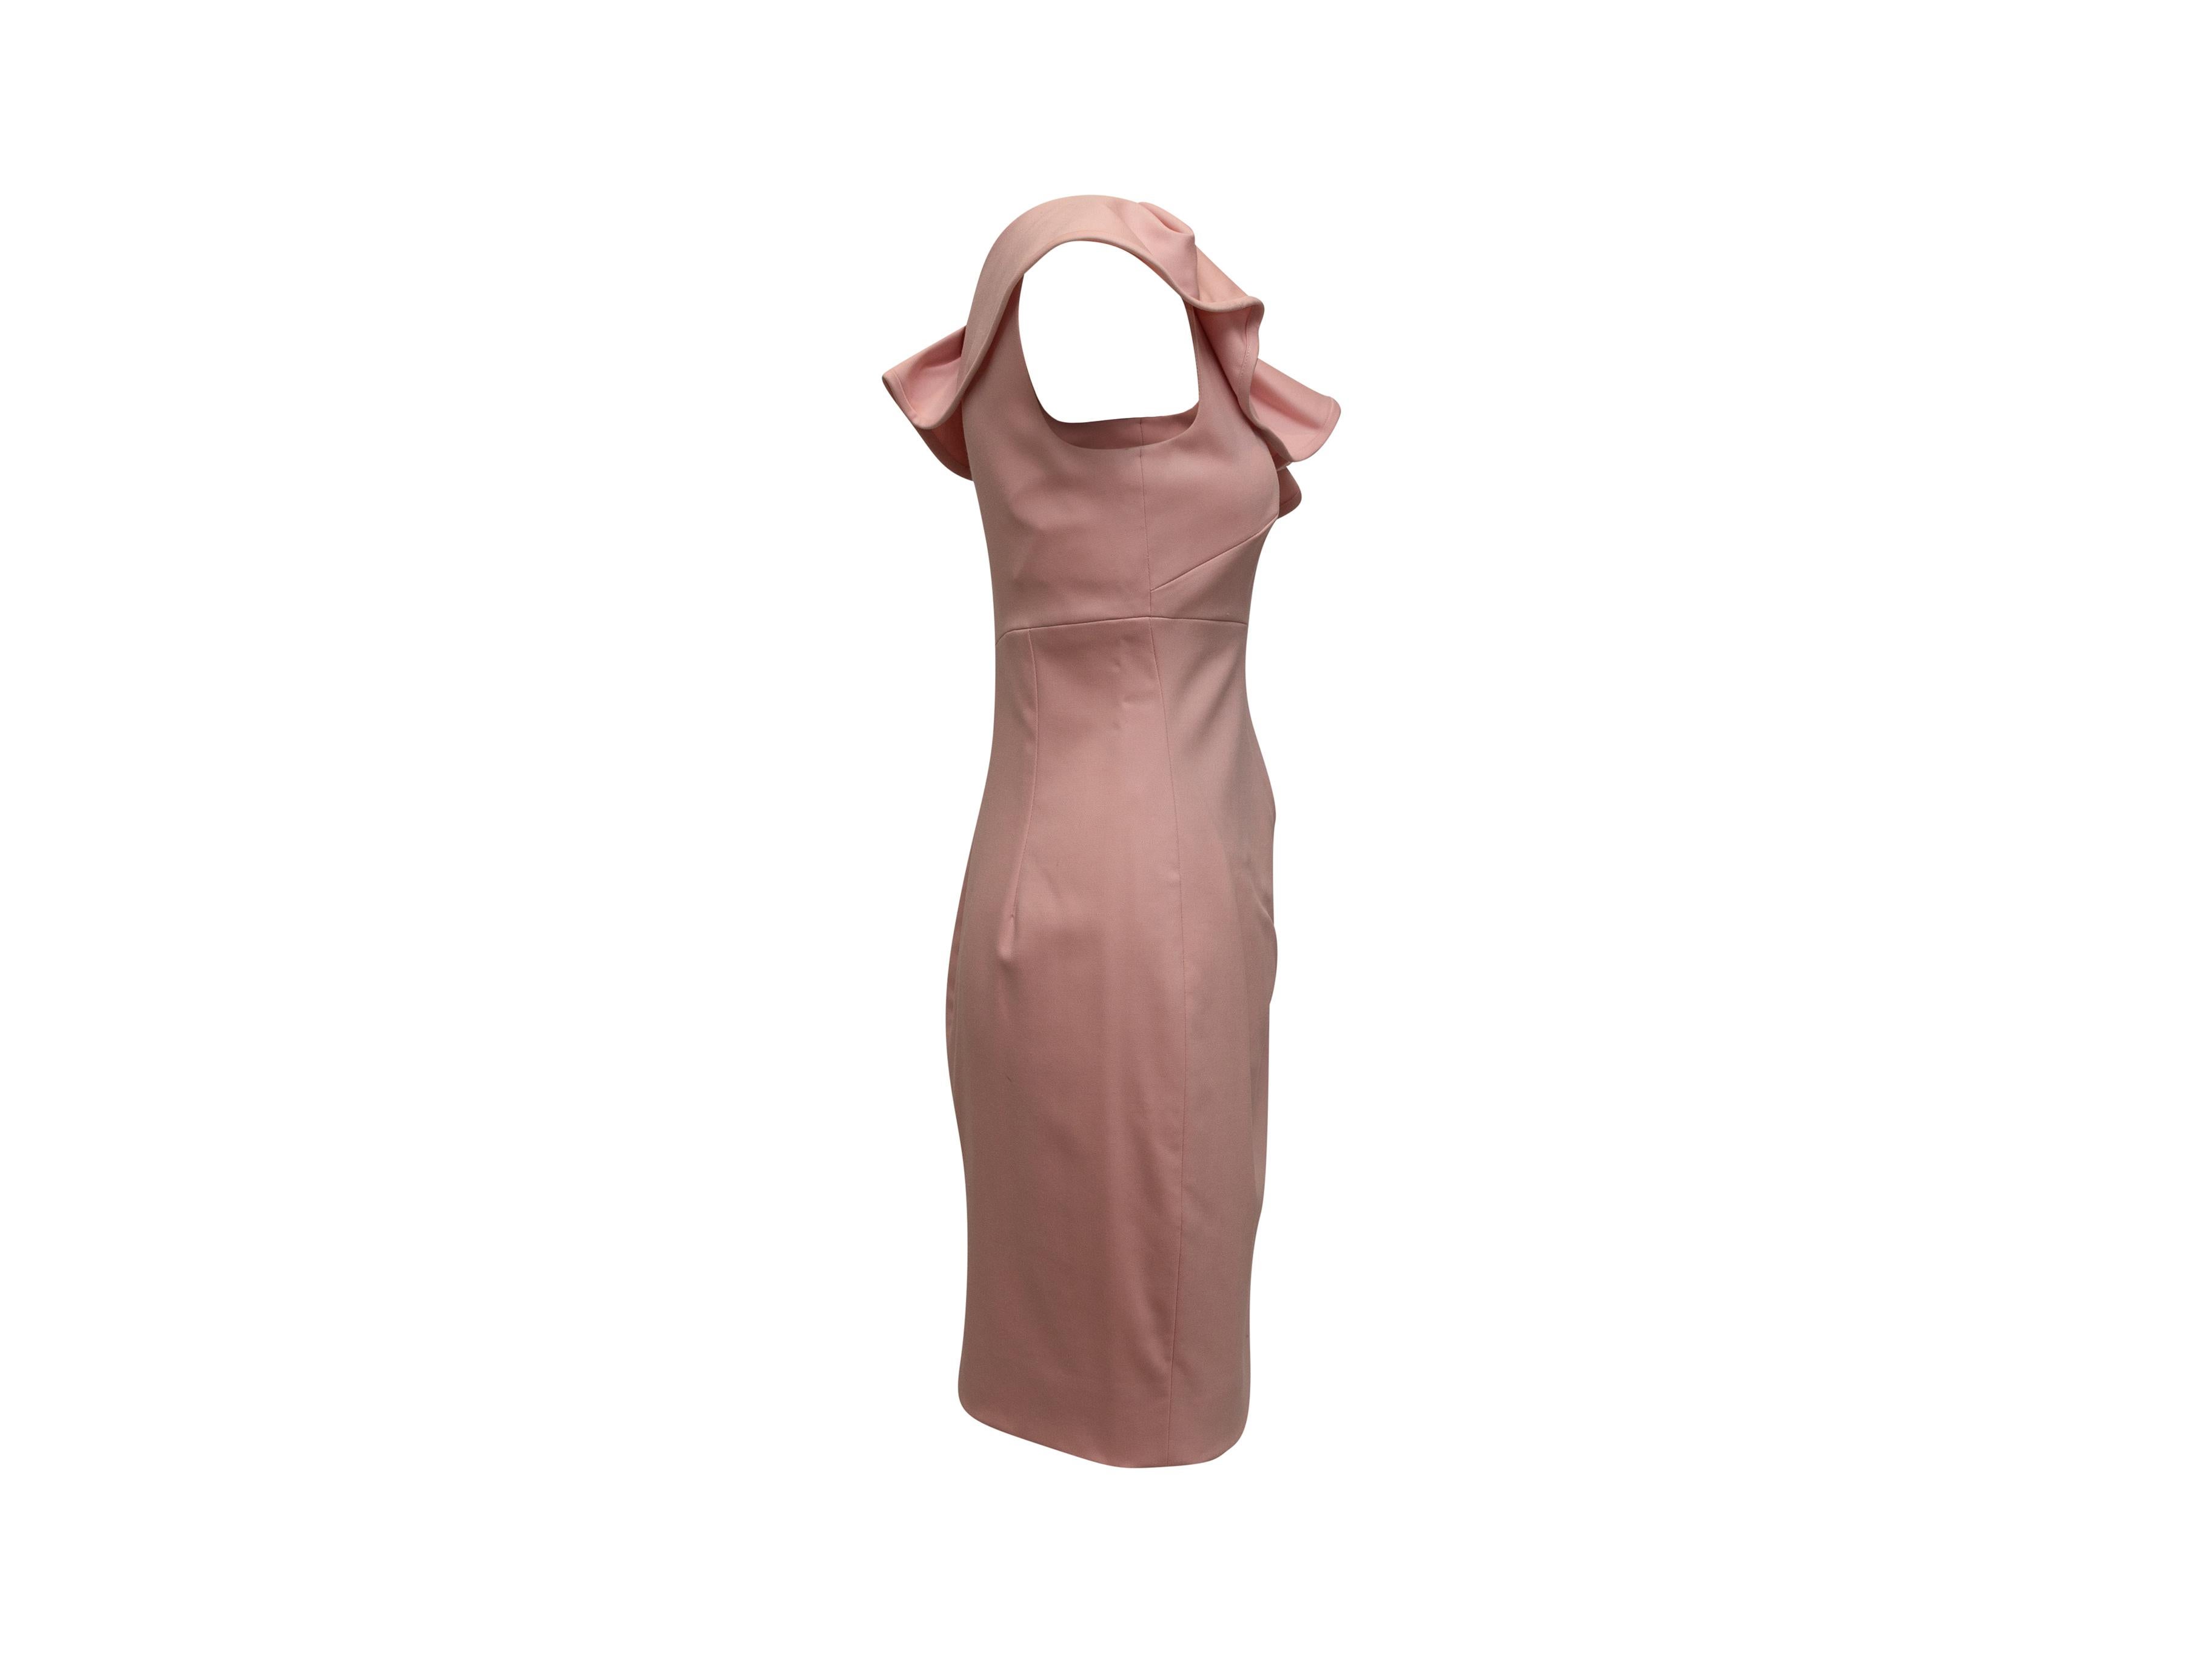 Product details: Pale pink virgin wool one-shoulder dress by Valentino Technocouture. Ruffle trim. 32